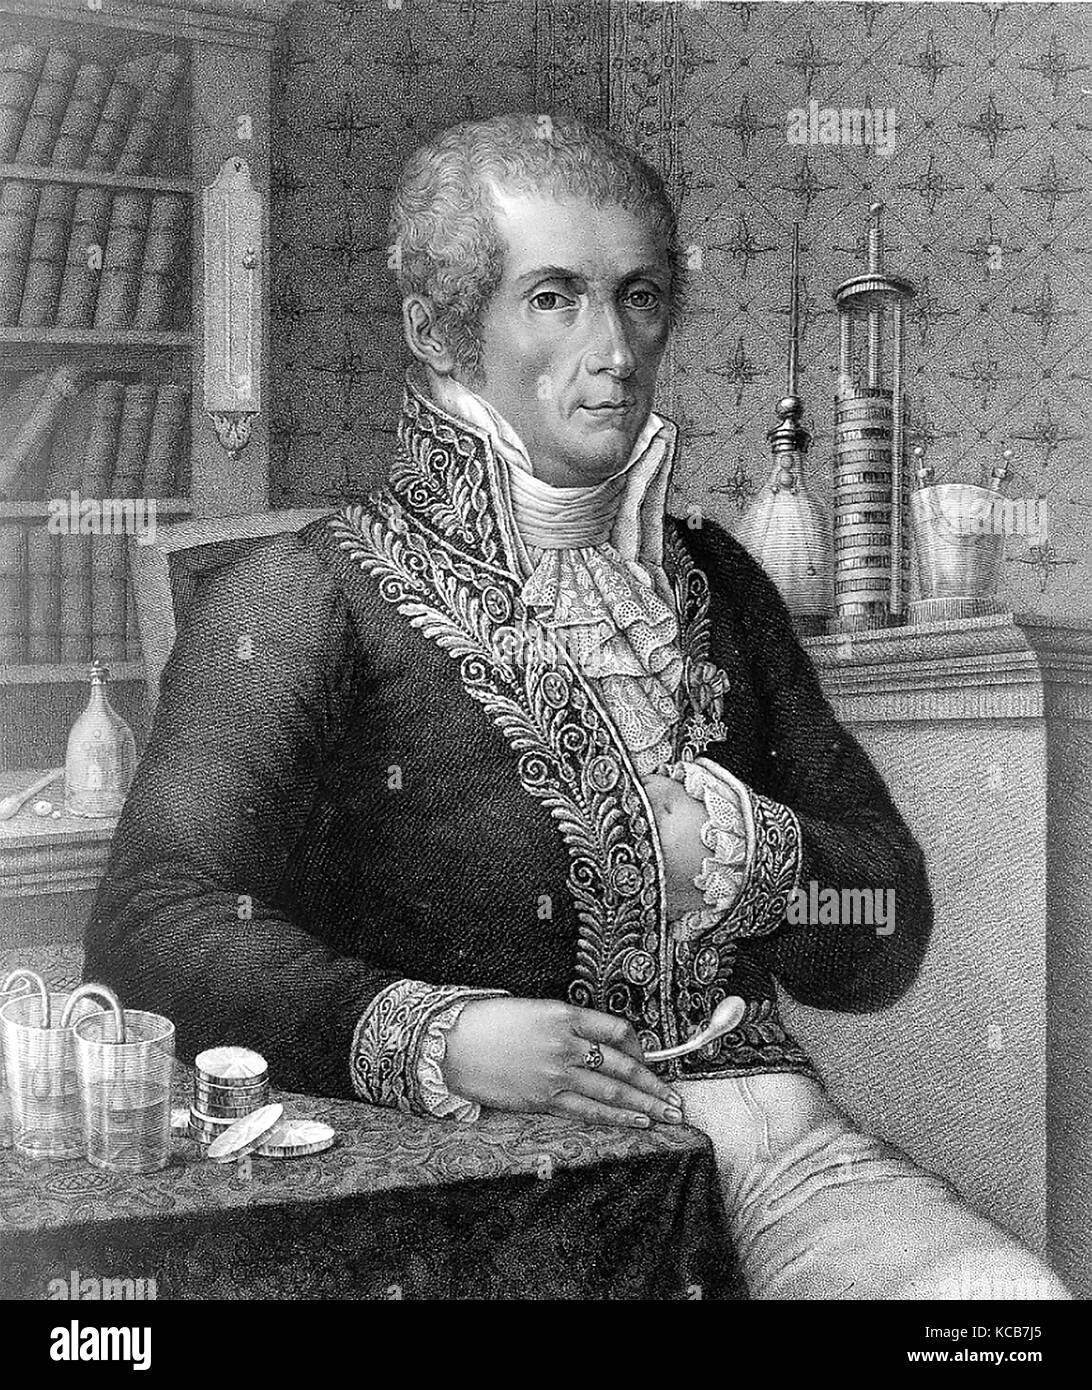 ALESSANDRO VOLTA (1745-1827) Italian chemist, physicist and inventor of the electric battery in an 1828 engraving Stock Photo